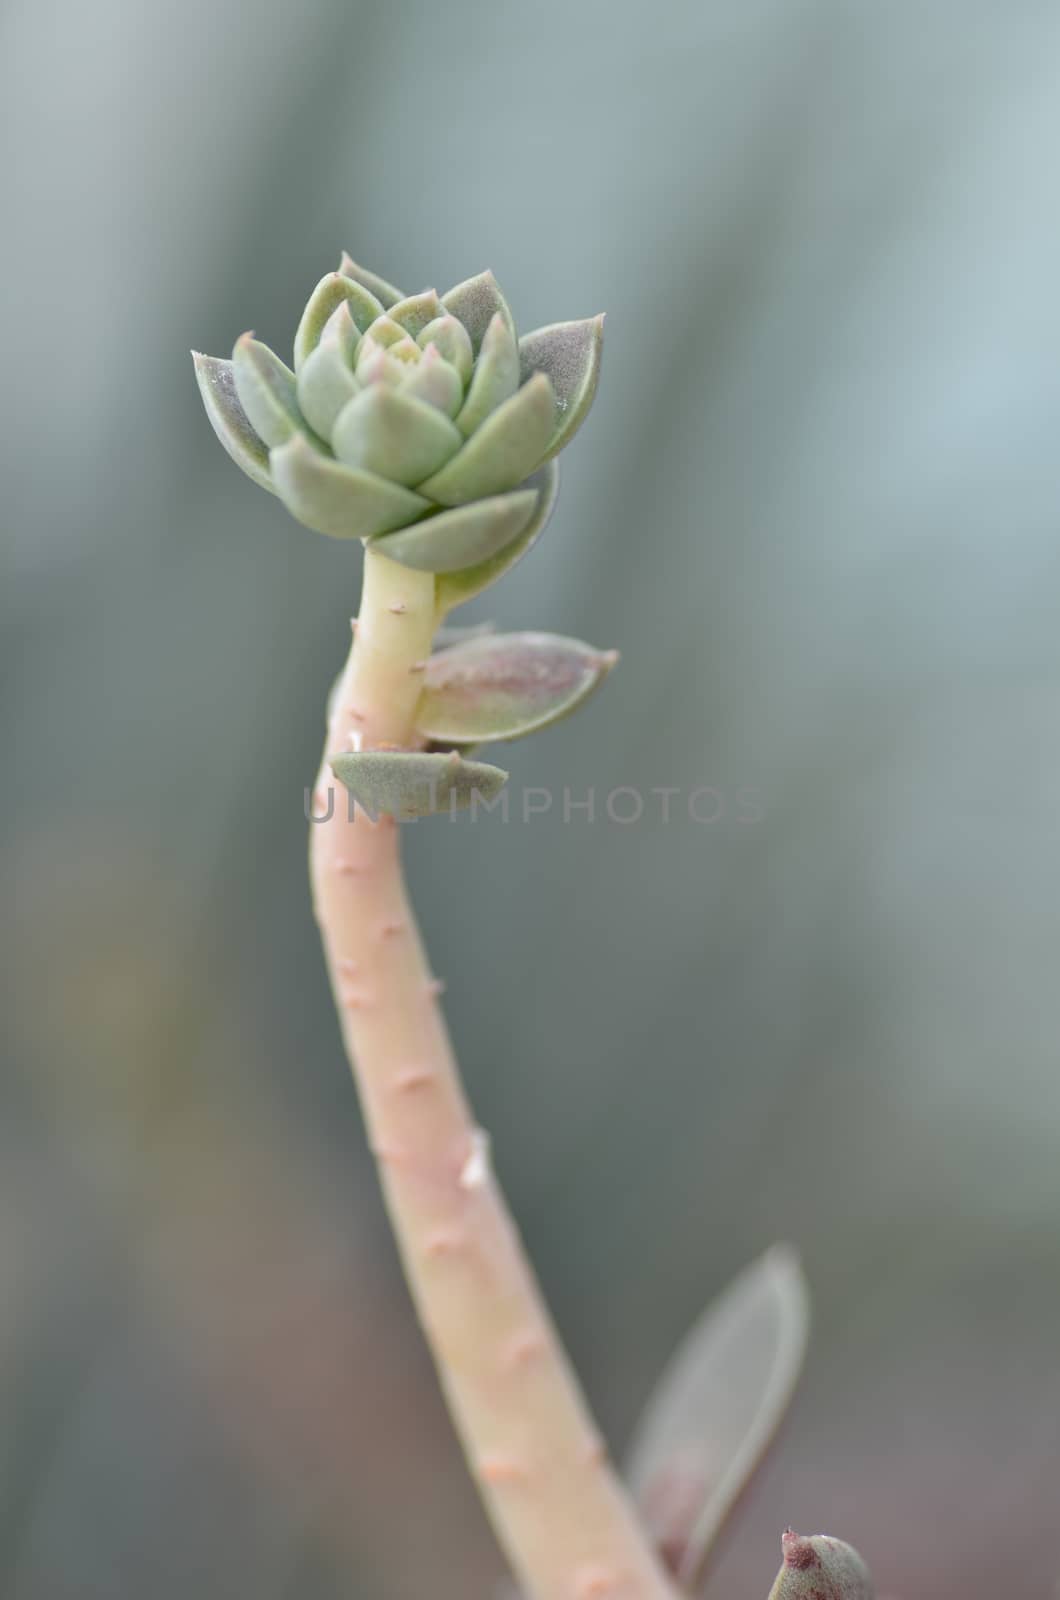 Sedeveria plant in the early days of spring. by tang90246